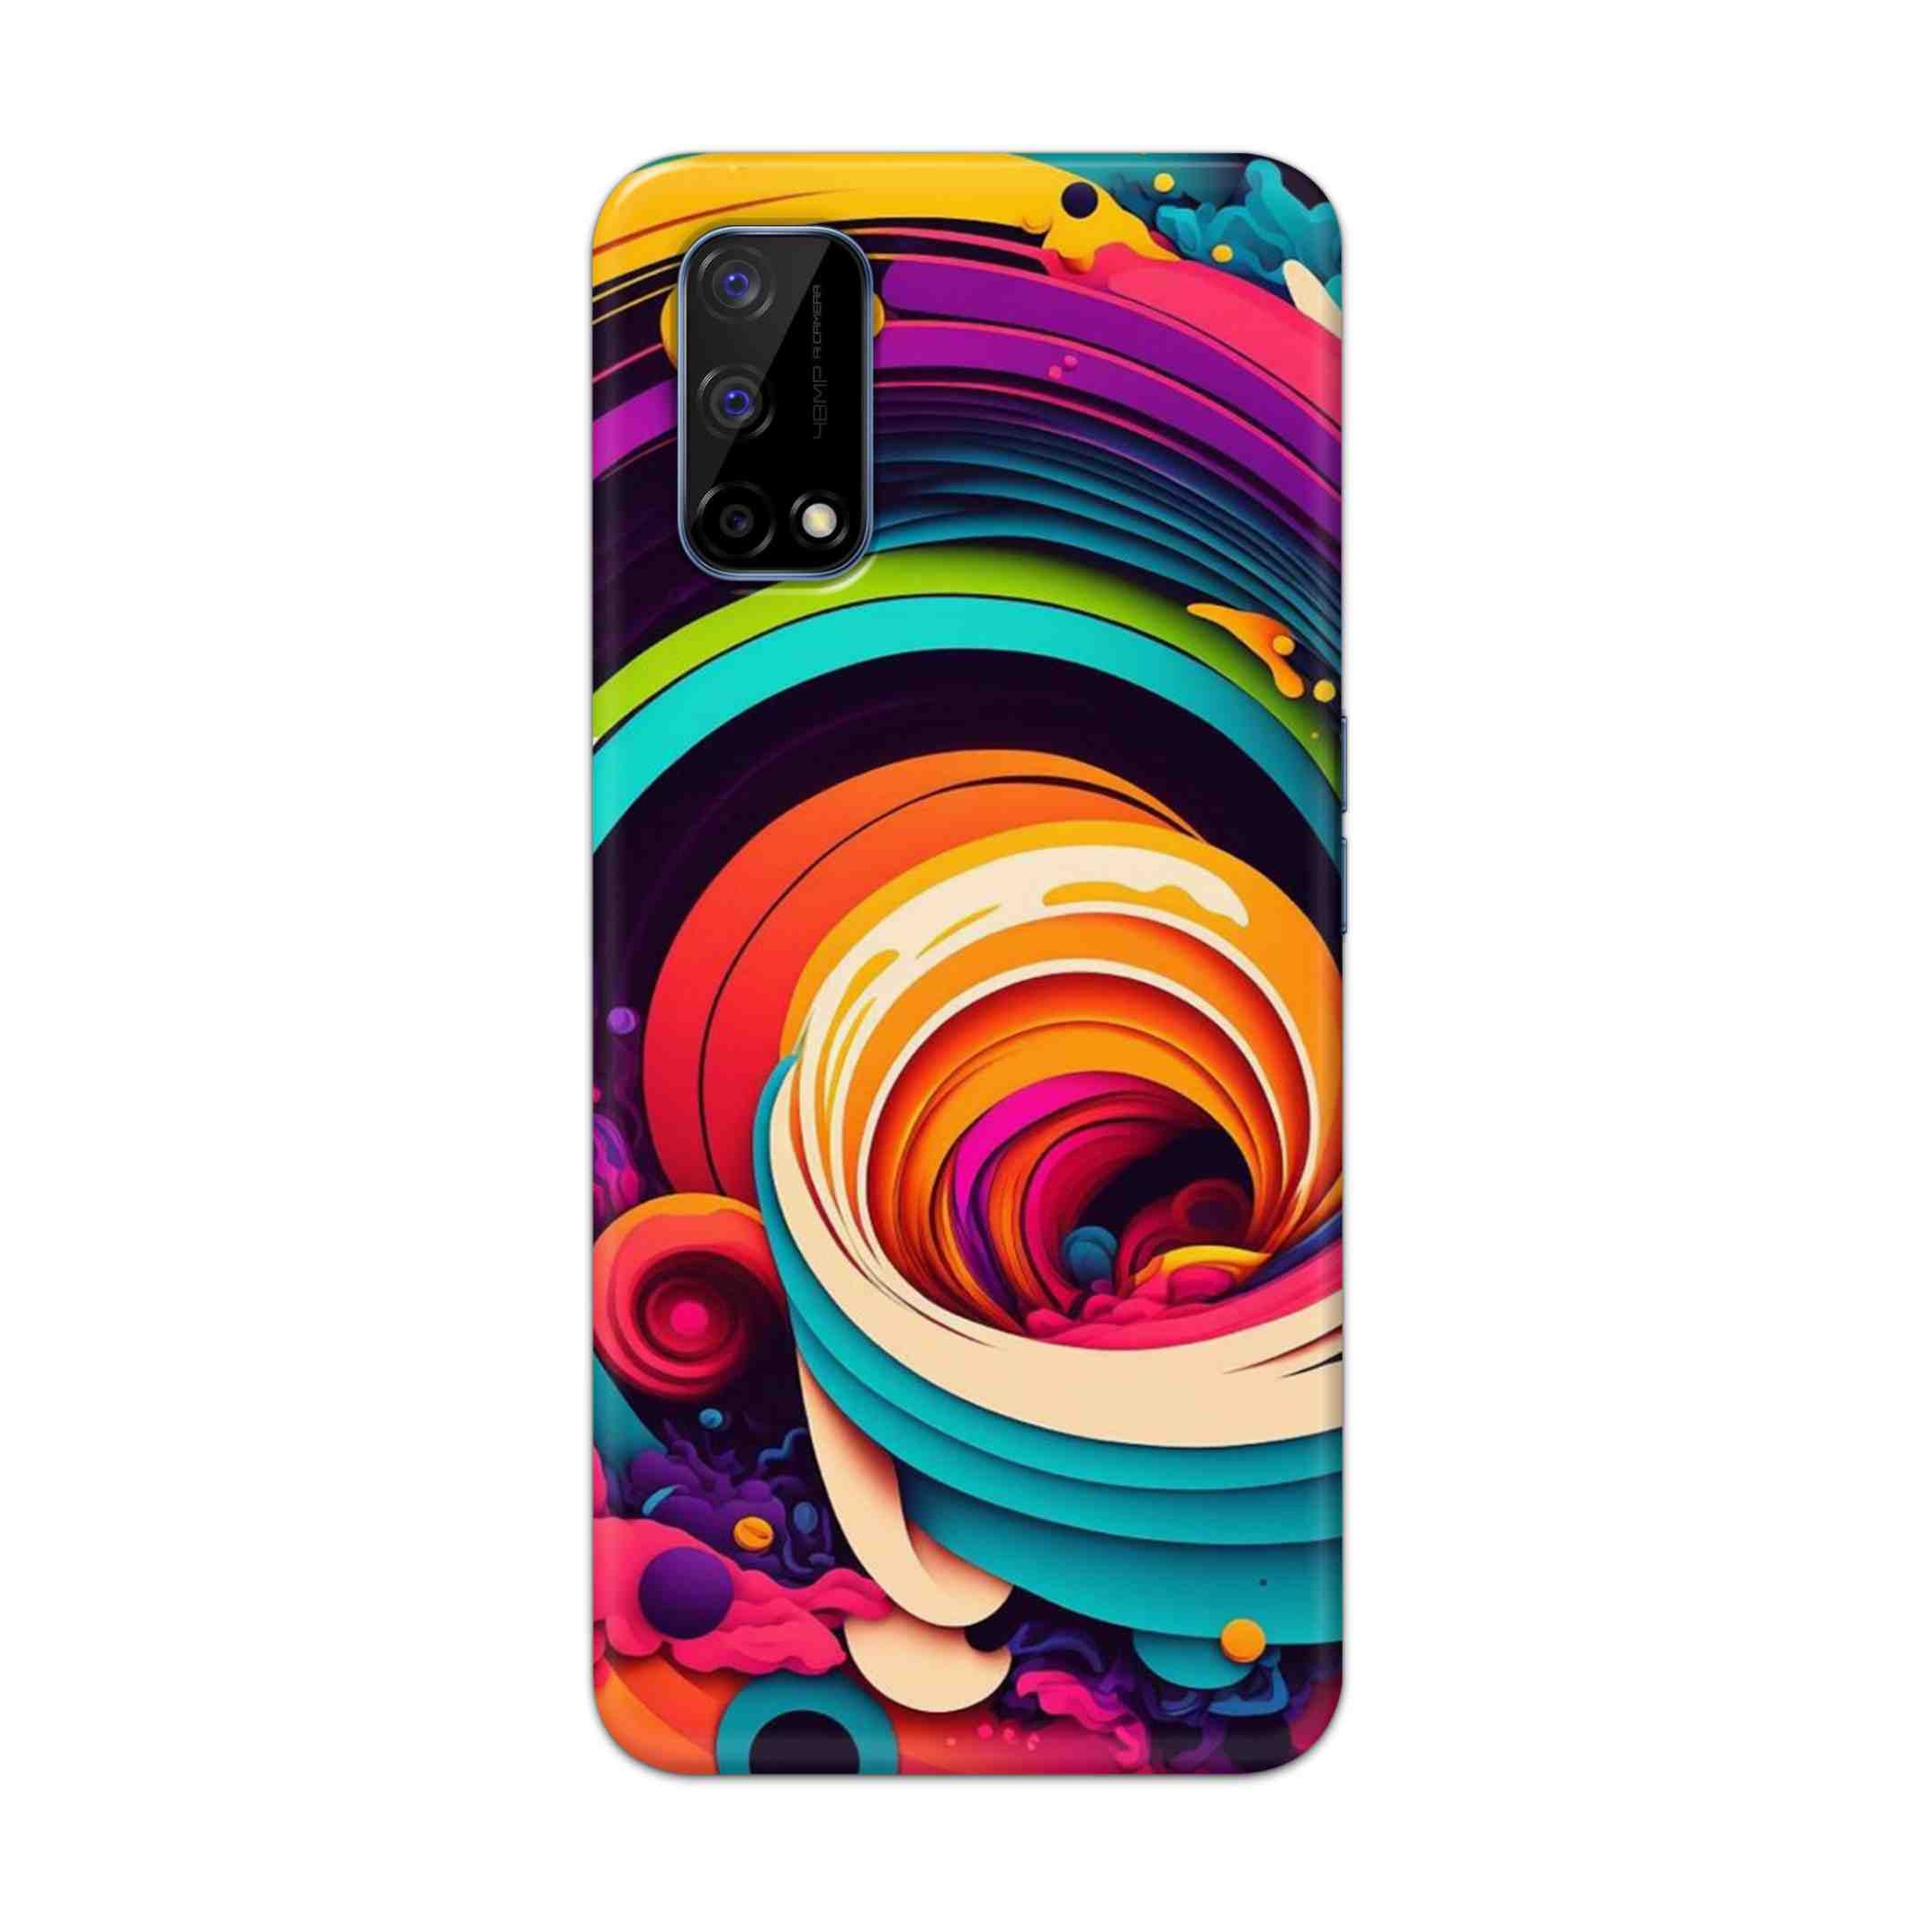 Buy Colour Circle Hard Back Mobile Phone Case Cover For Realme Narzo 30 Pro Online